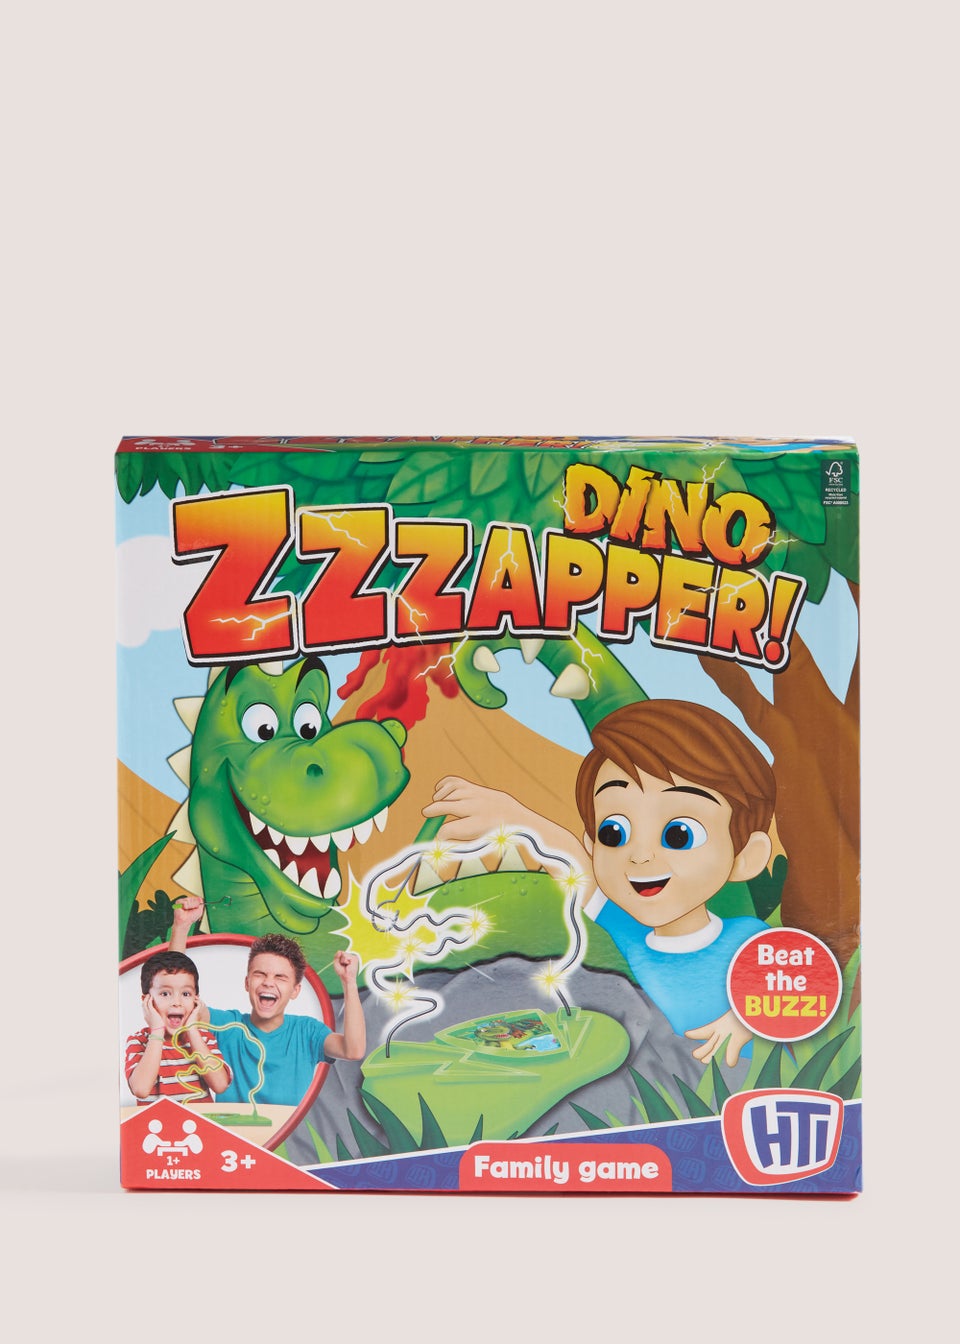 Can we Beat the Dinosaur Game? 